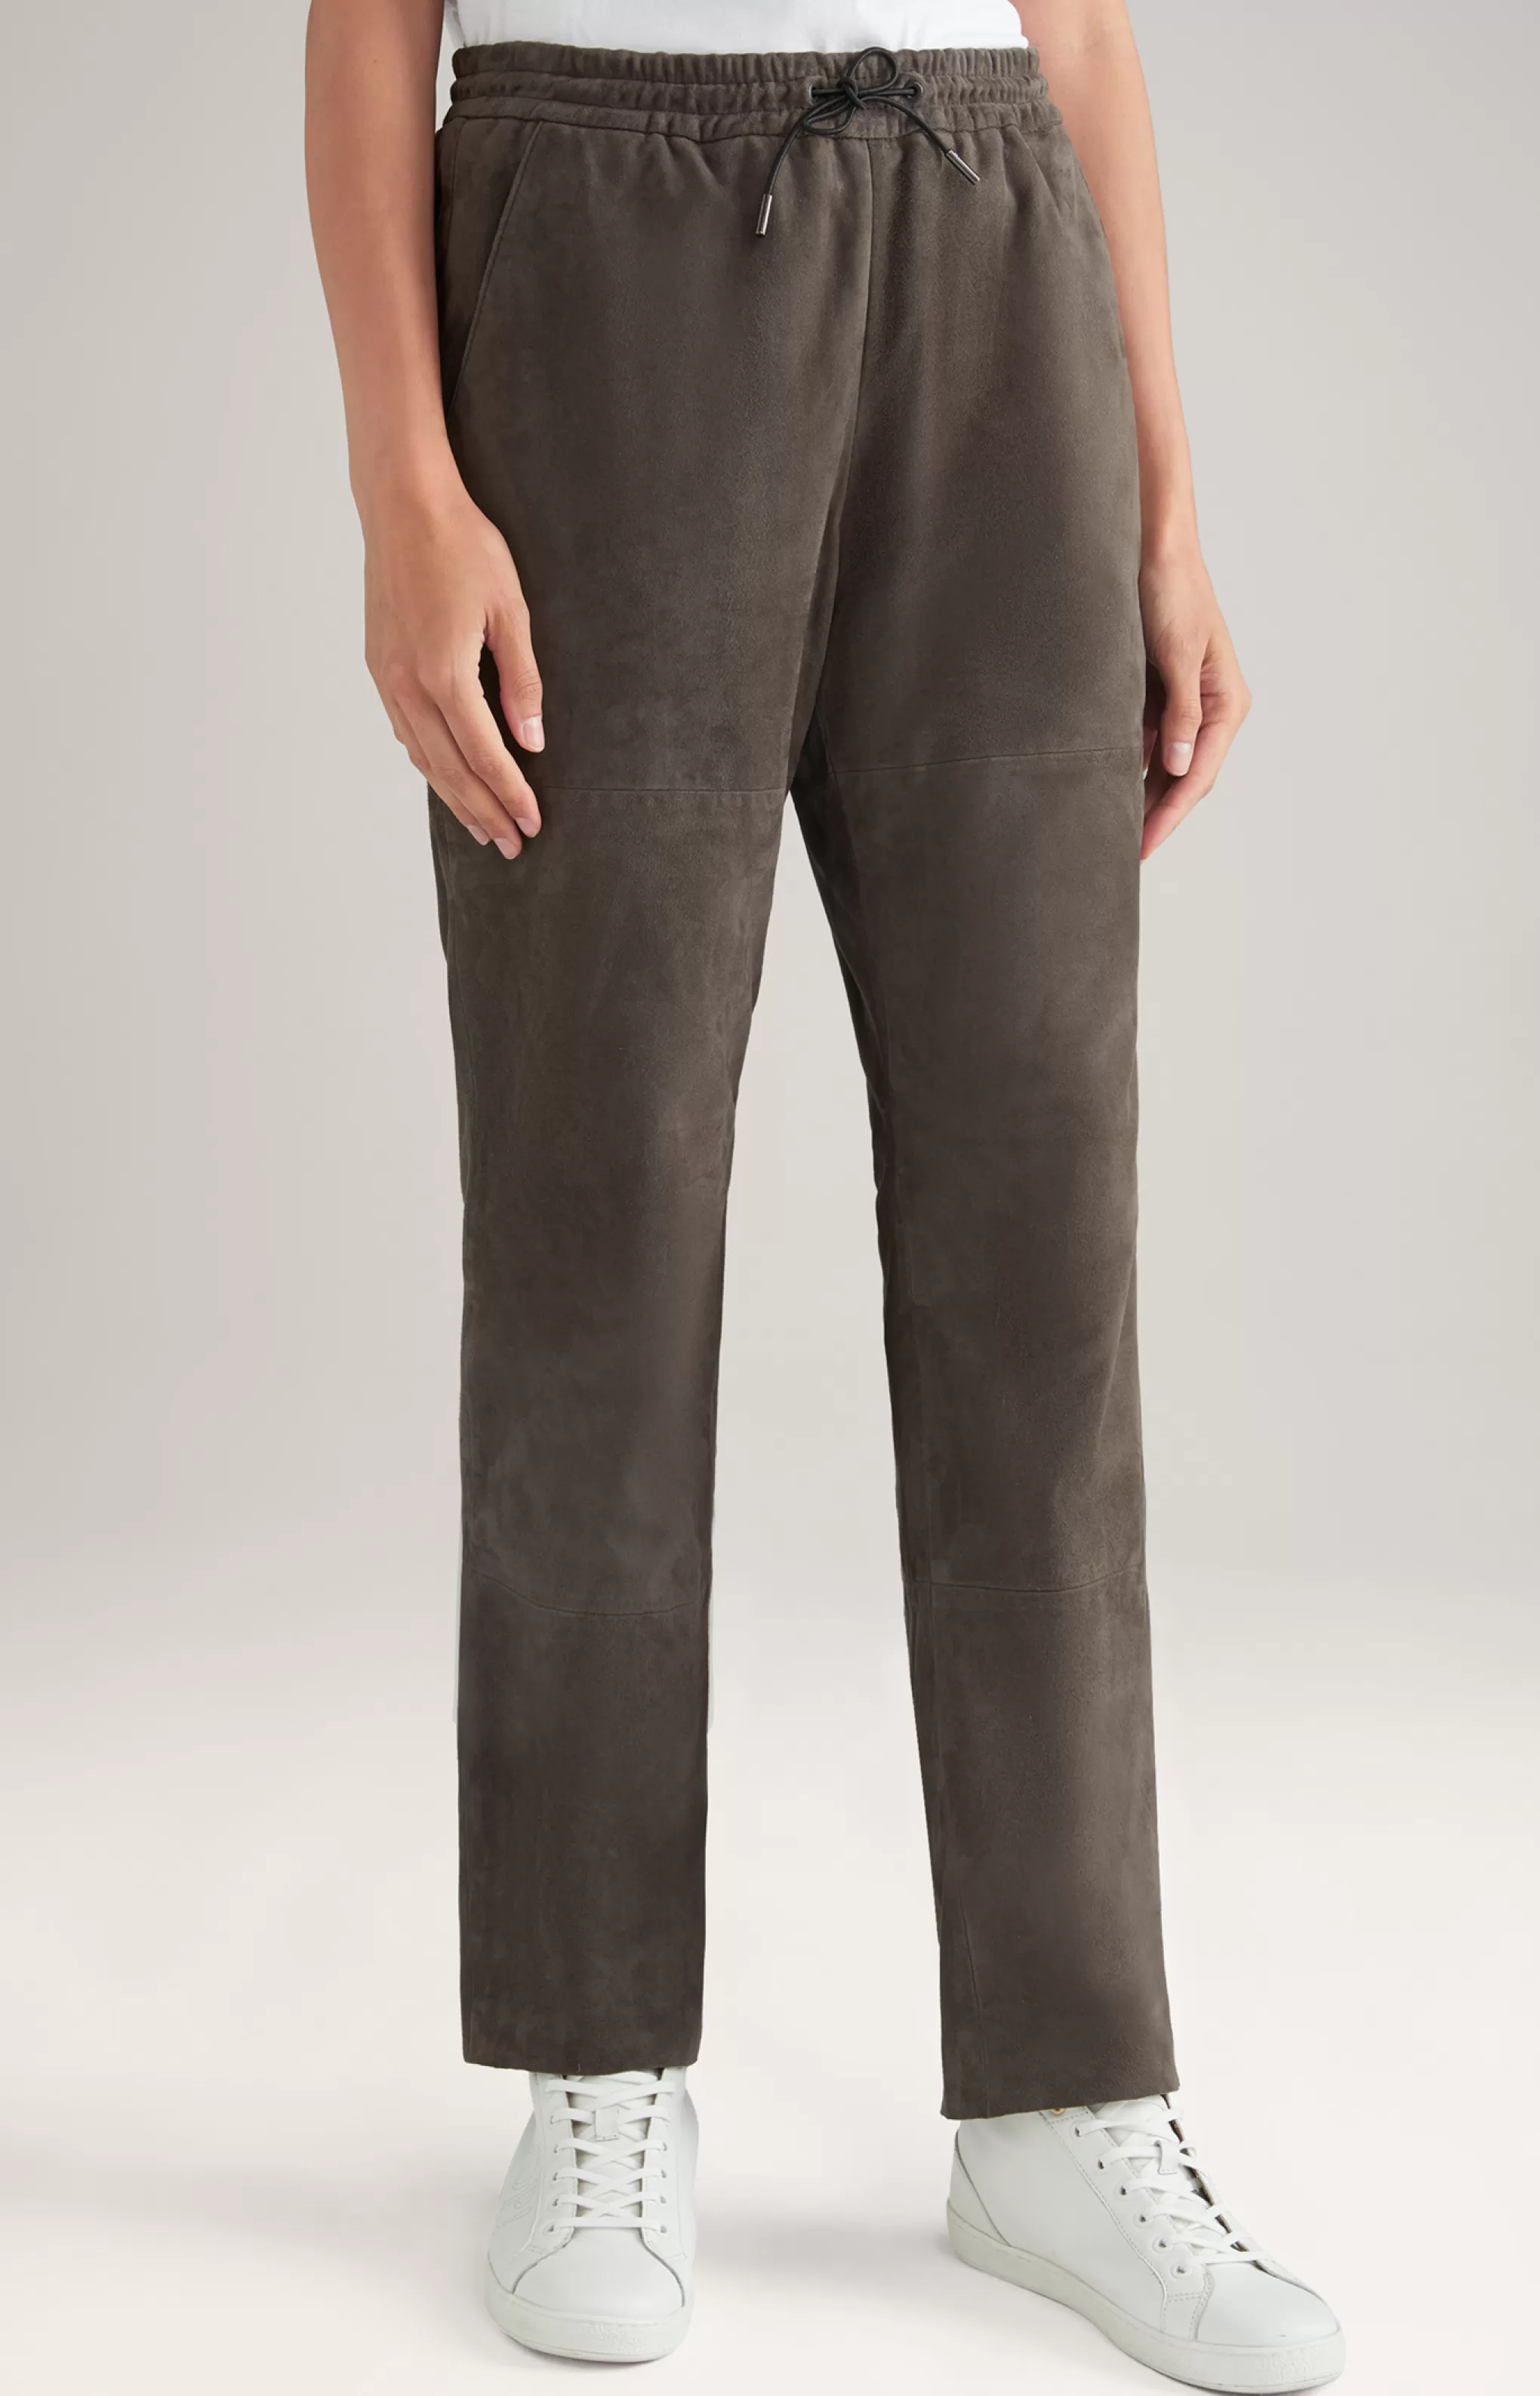 Leather | Trousers | Clothing*JOOP Leather | Trousers | Clothing Leather Trousers in